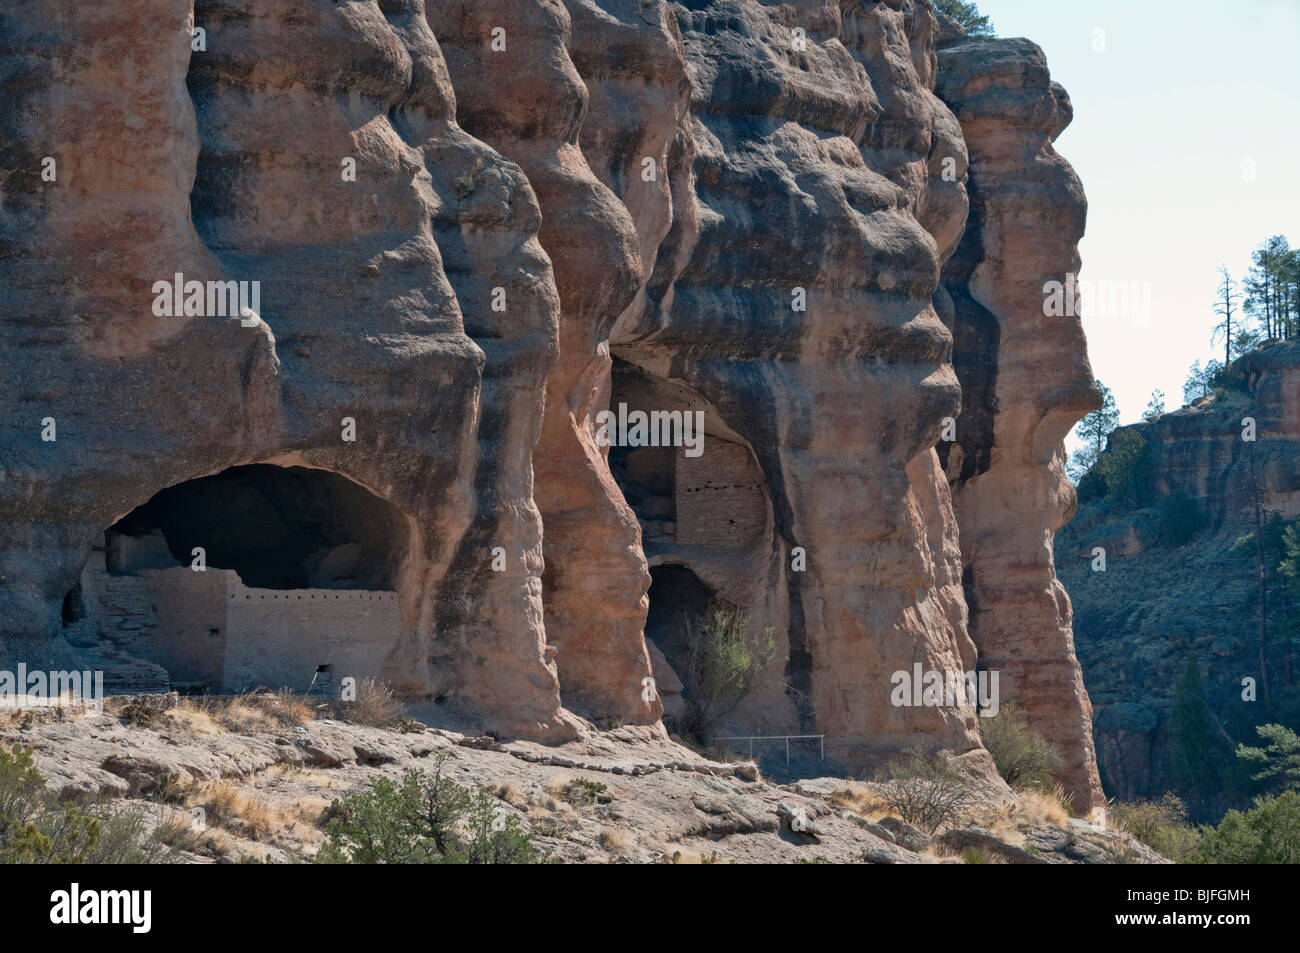 New Mexico, Gila Cliff Dwellings National Monument Stock Photo